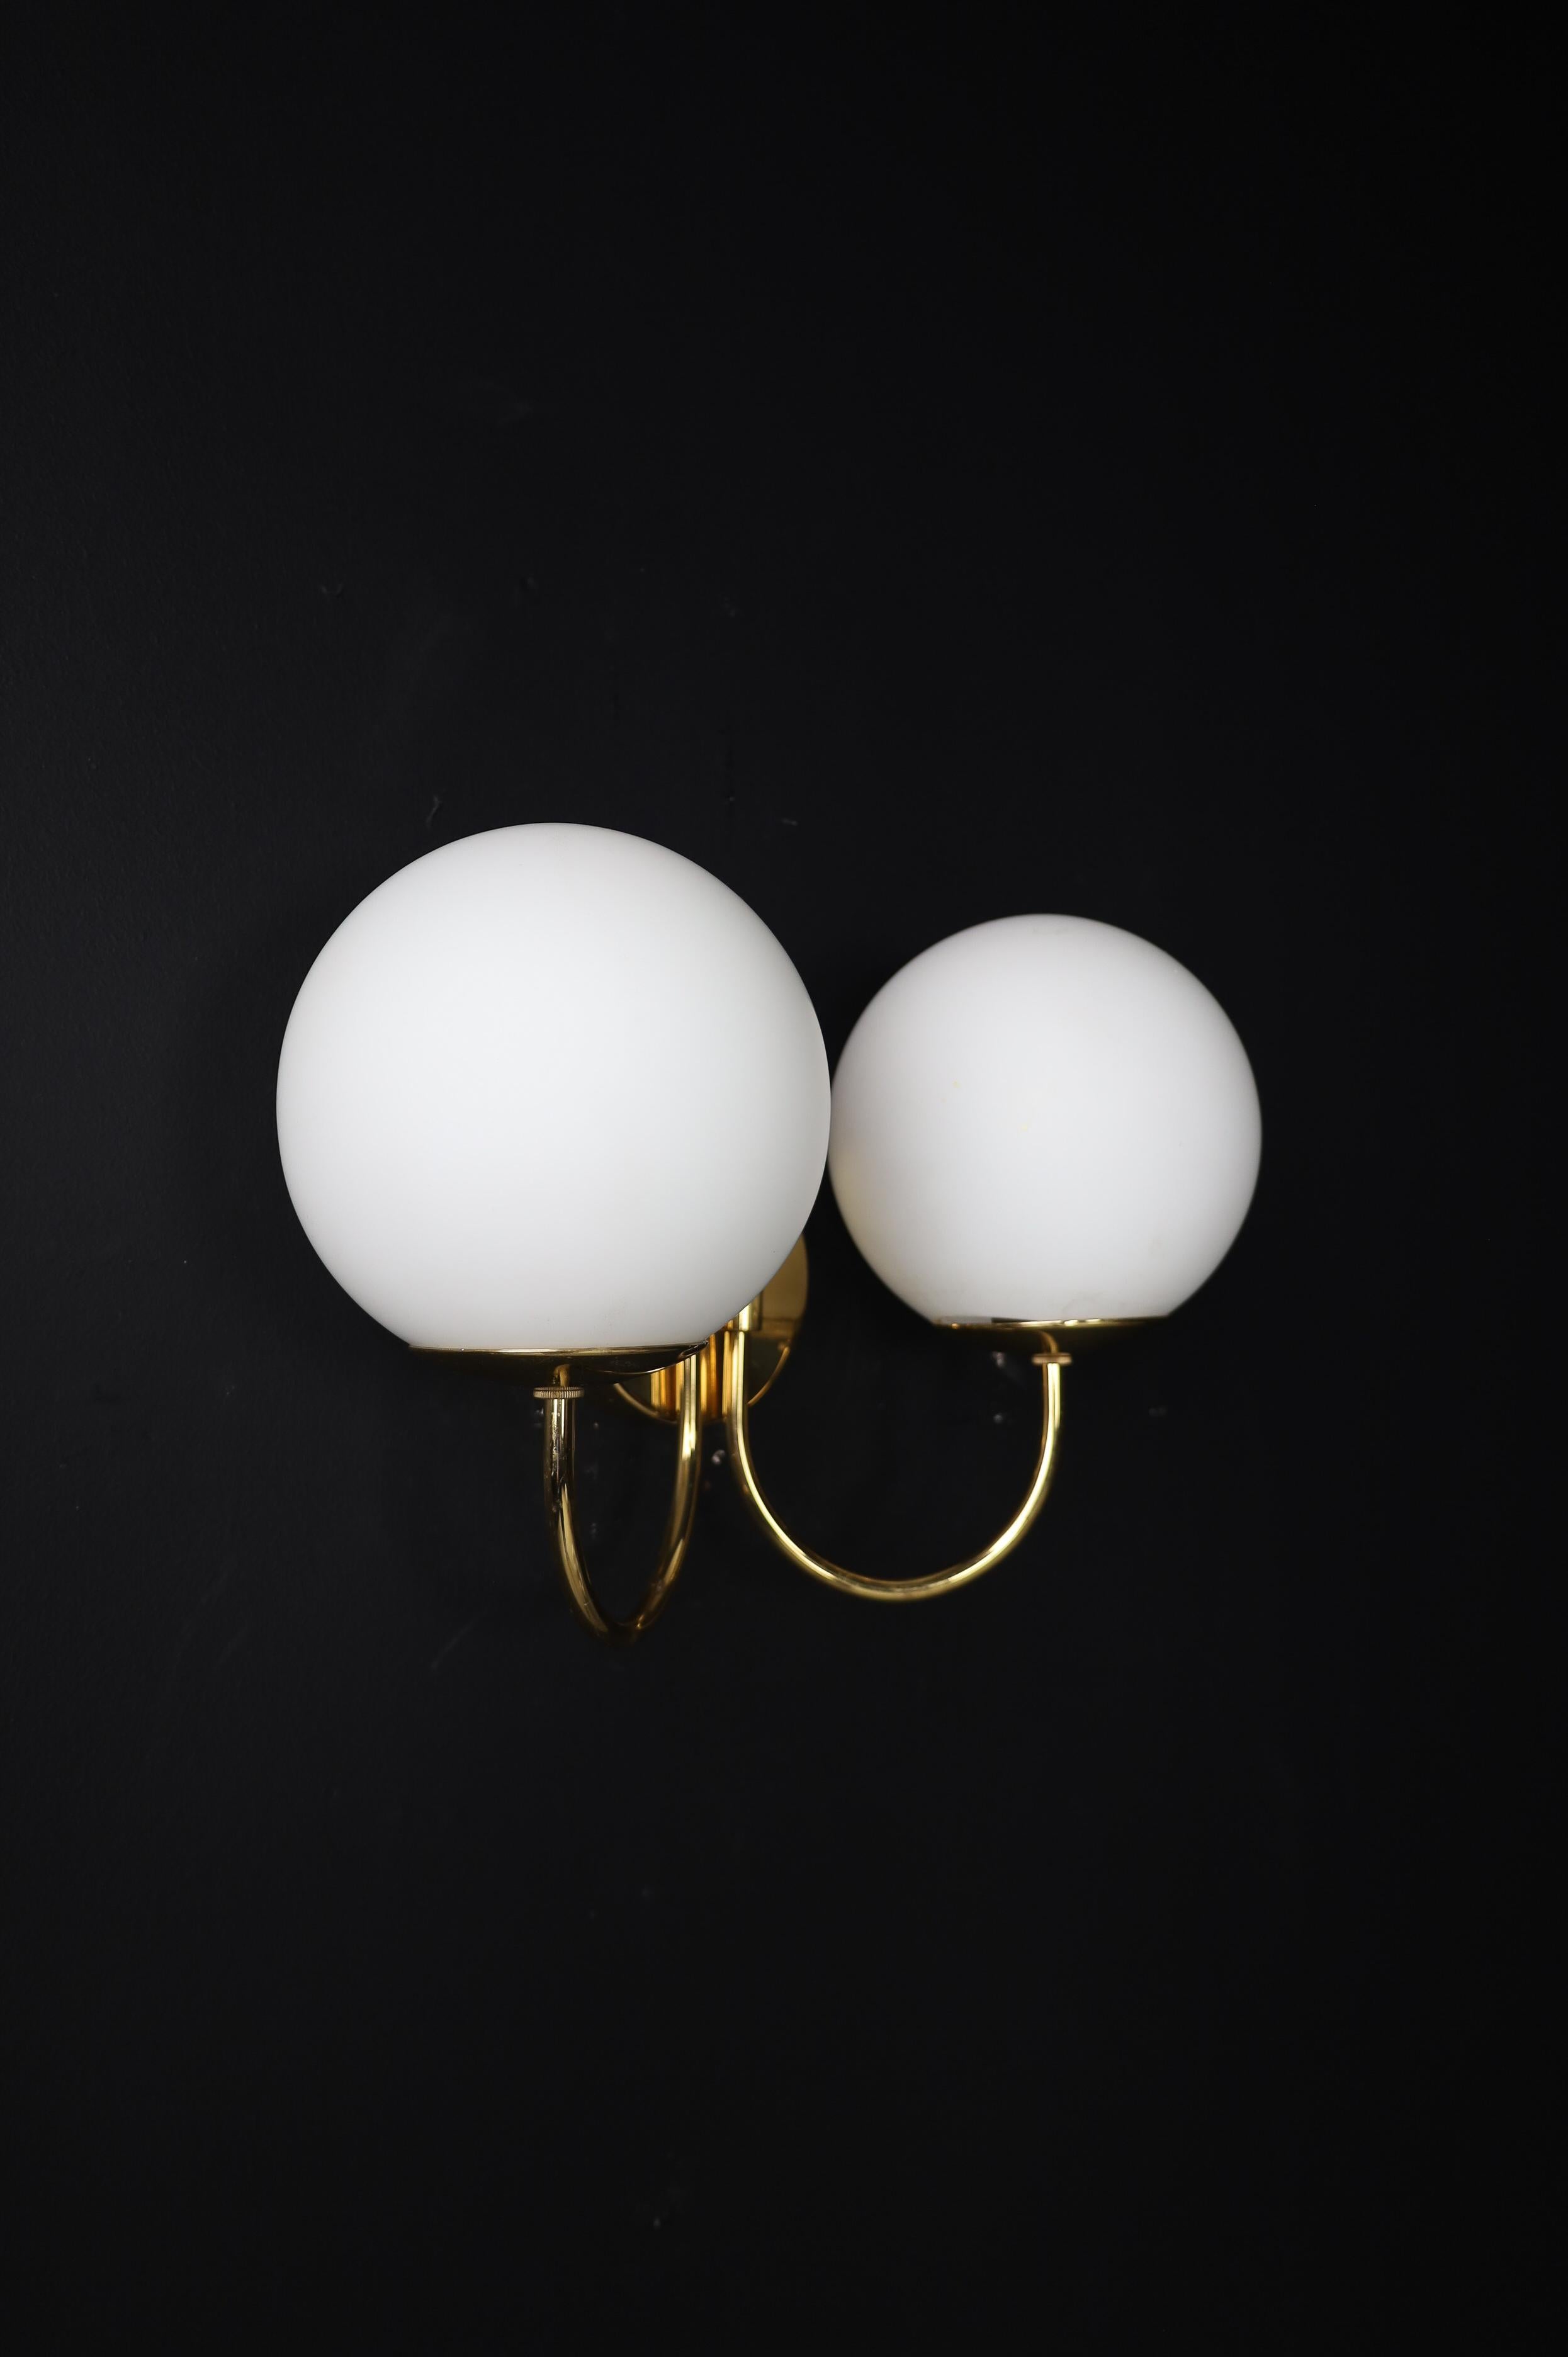 Elegant Sconces with Brass Fixtures and Opaline Glass Globes, Italy, 1960s For Sale 4